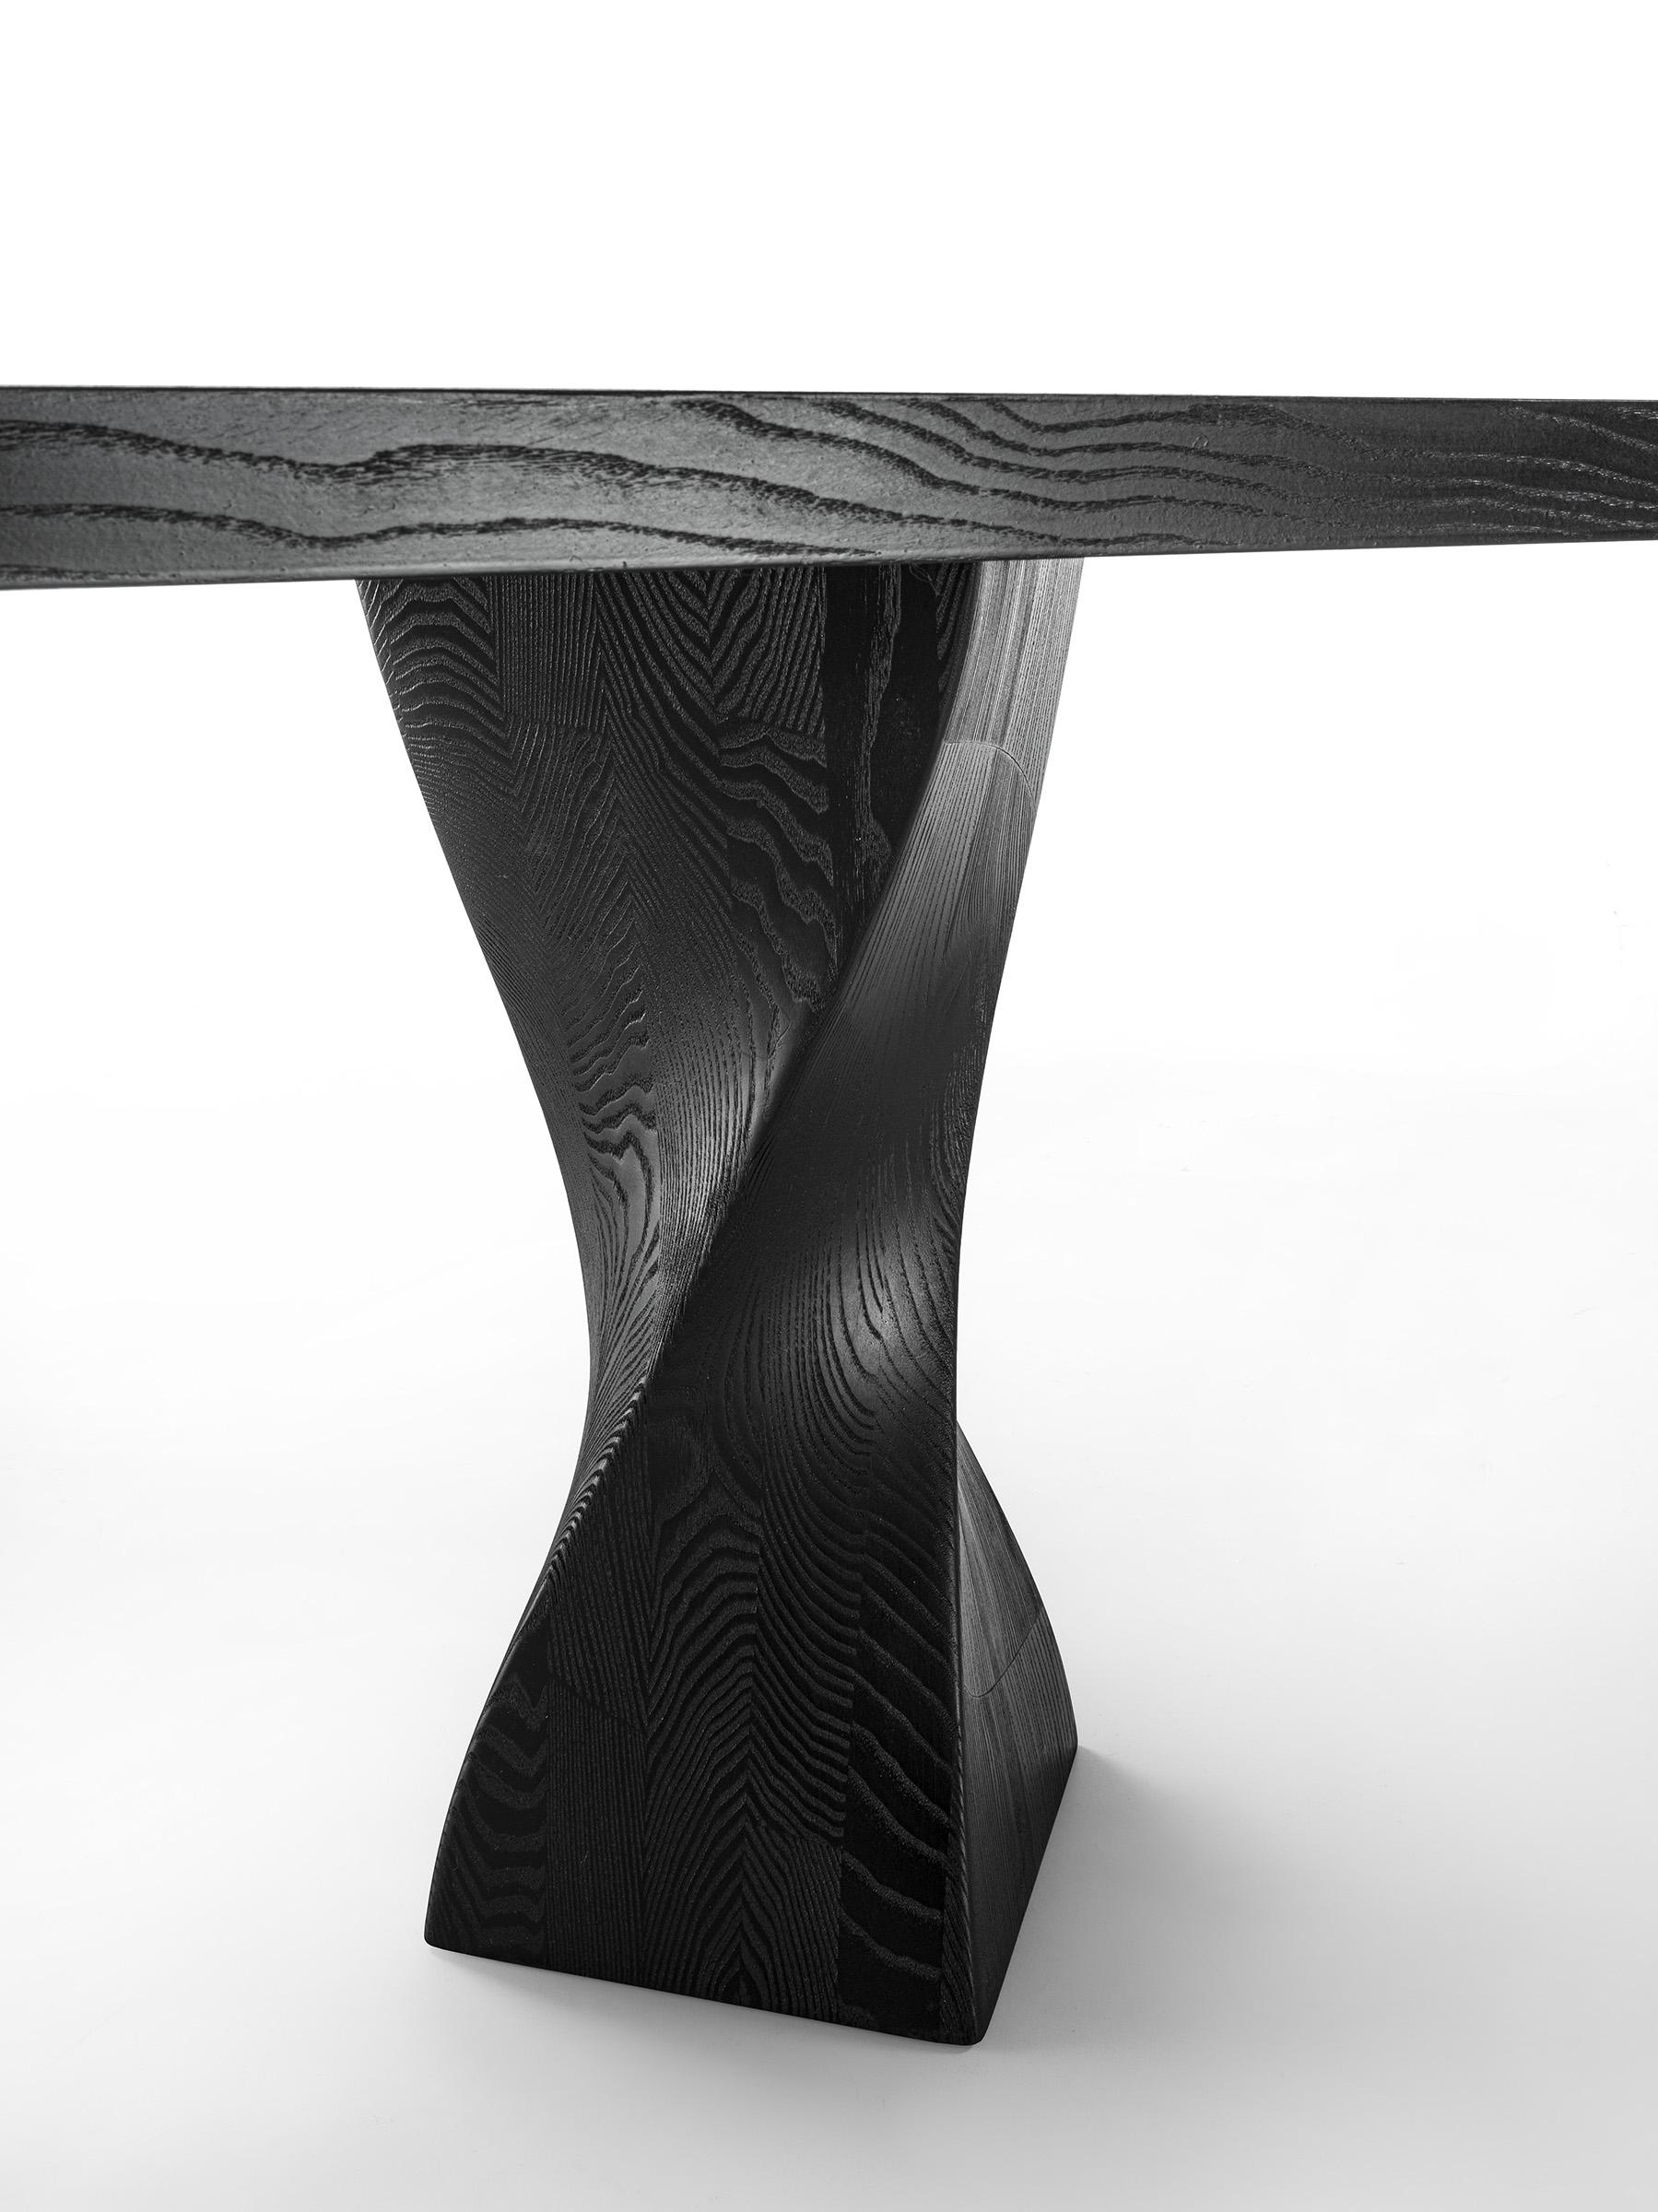 Italian Contemporary Dining Table Ft Beveled Edges And Twisted Legs For Sale